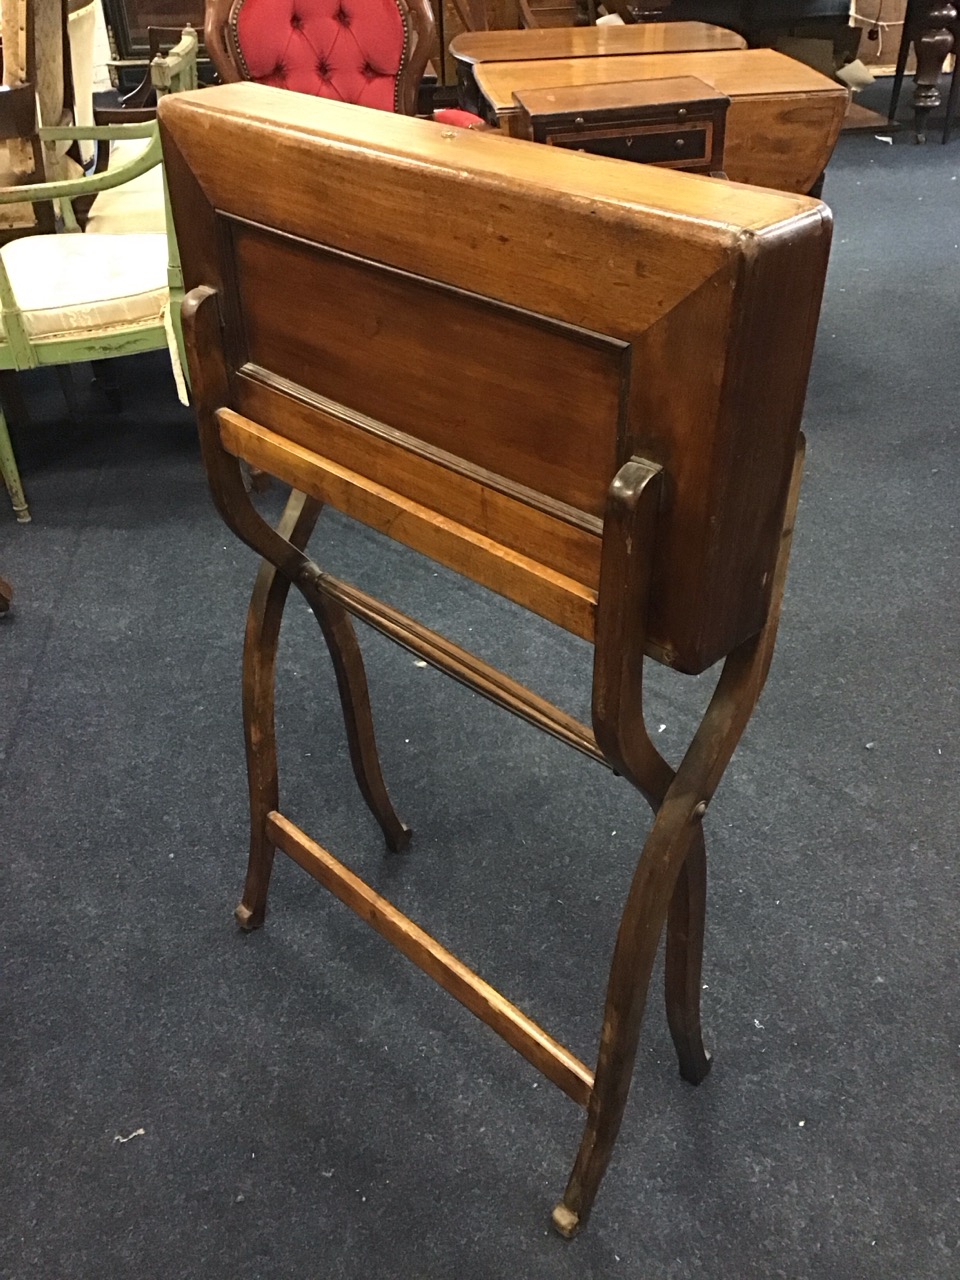 An Edwardian mahogany campaign writing desk with panelled sides and brass fittings enclosing a - Image 2 of 3